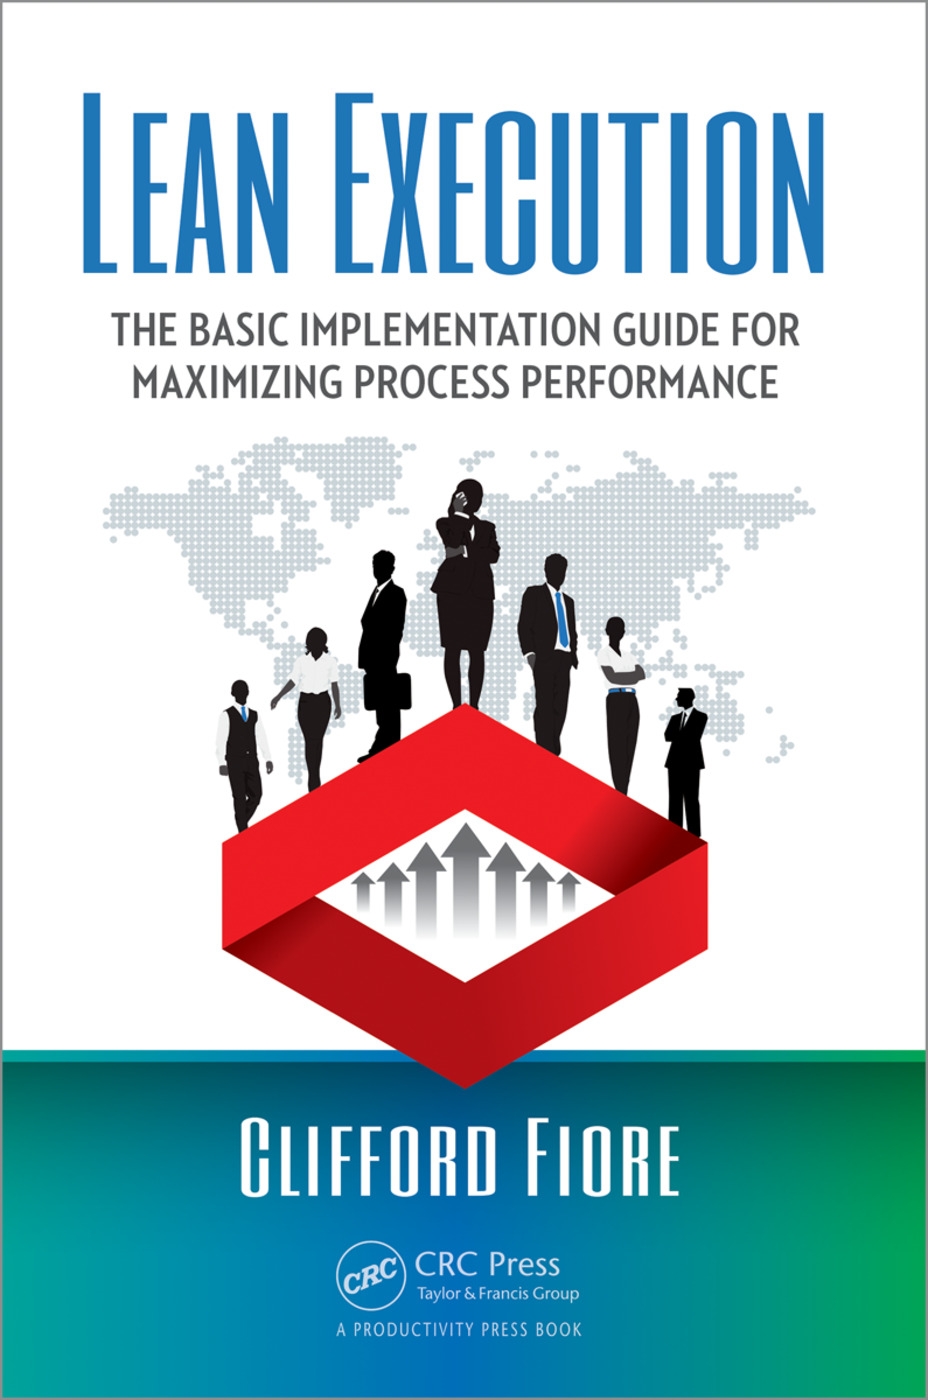 Lean Execution: The Basic Implementation Guide for Maximizing Process Performance